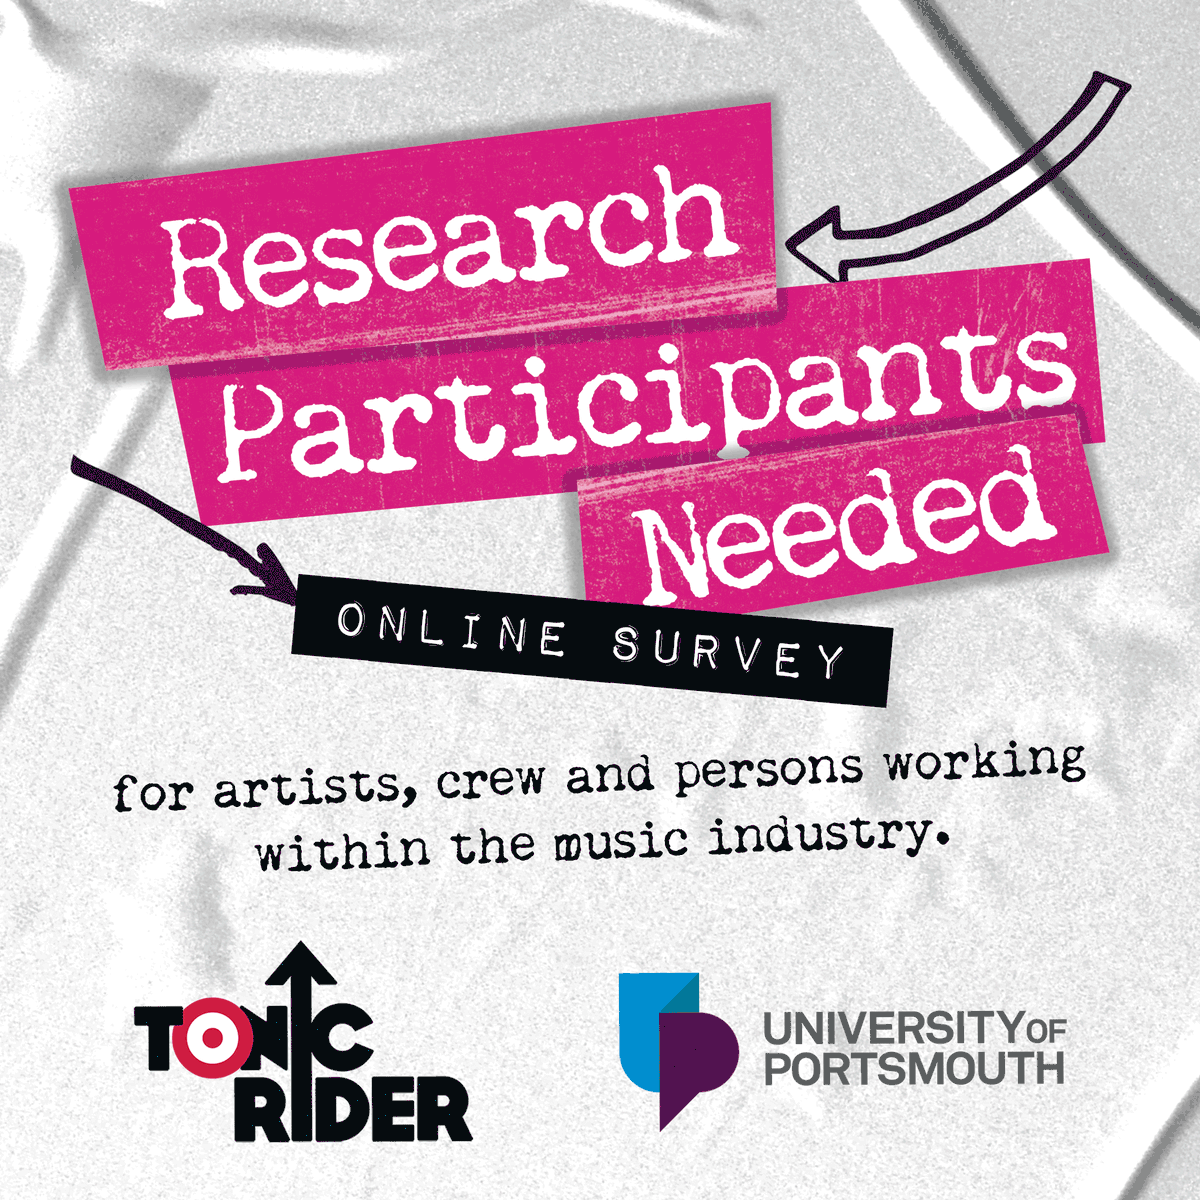 Calling ALL music artists, crew & industry pros!

For #MentalHealthAwarenessWeek, please help us by completing our survey on mental health in the music industry...

To take part >  tonicmusic.co.uk/research 

#TonicRider #MentalHealth #Wellbeing #Music